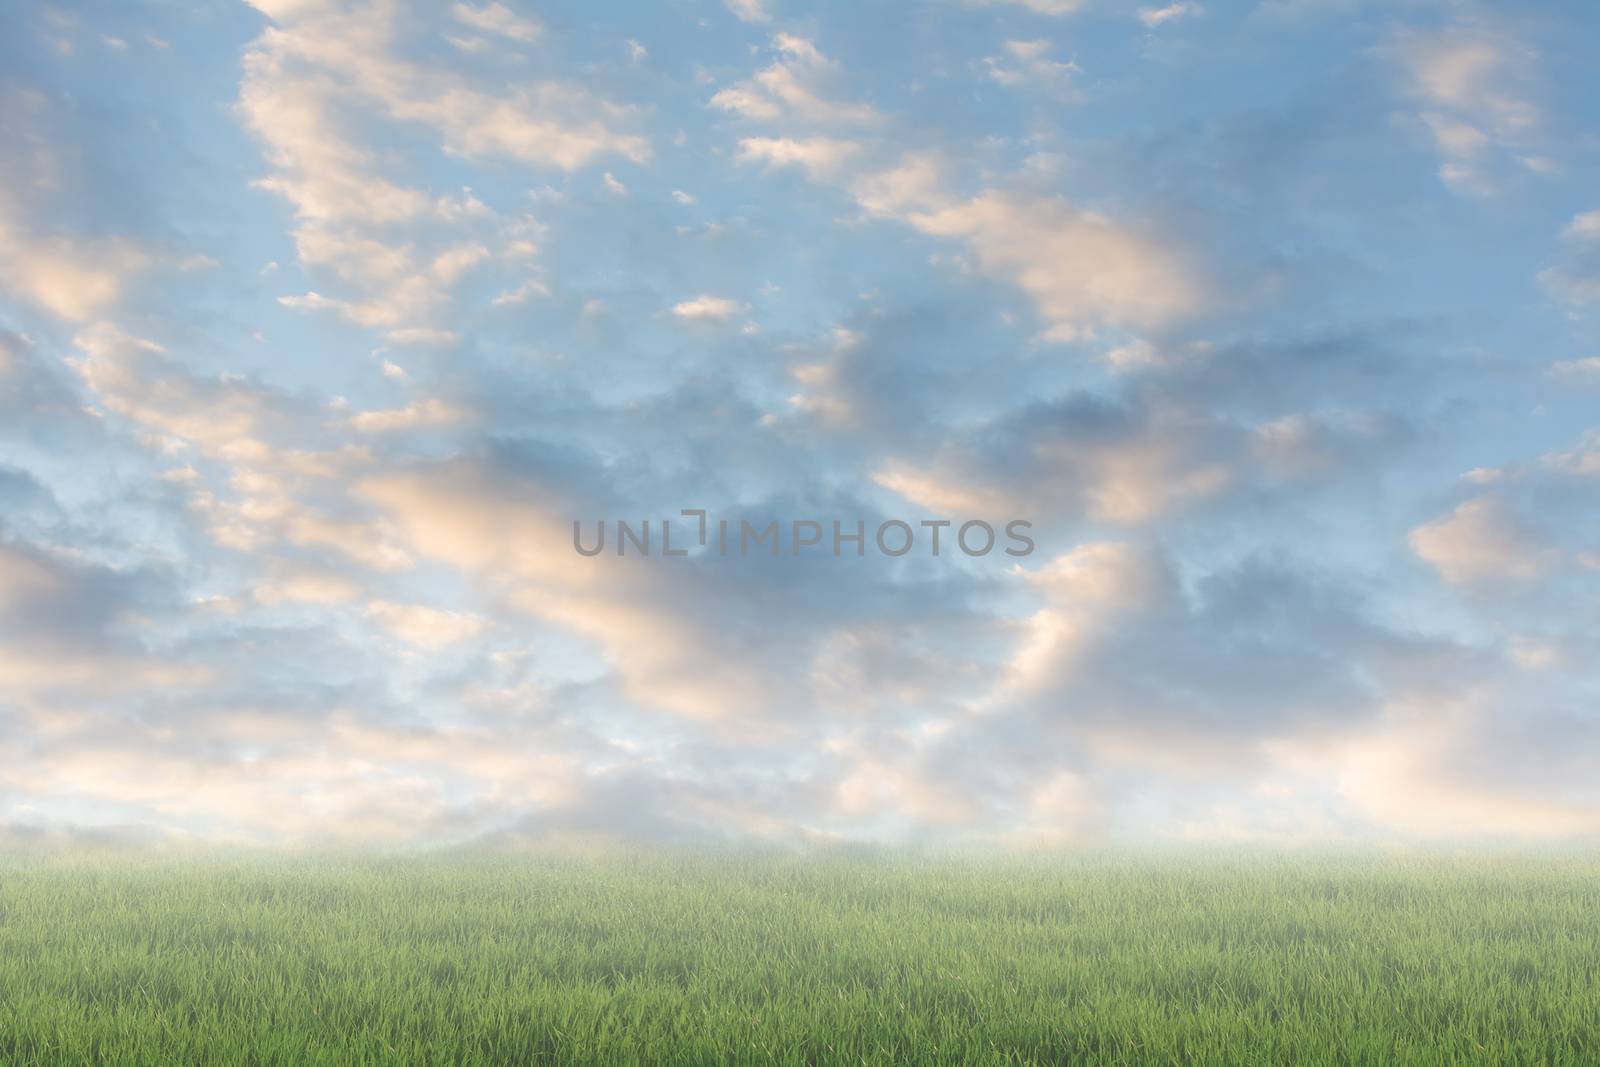 Scenic of clouds on heaven above the ground. Good background for you to put text or people on the ground.